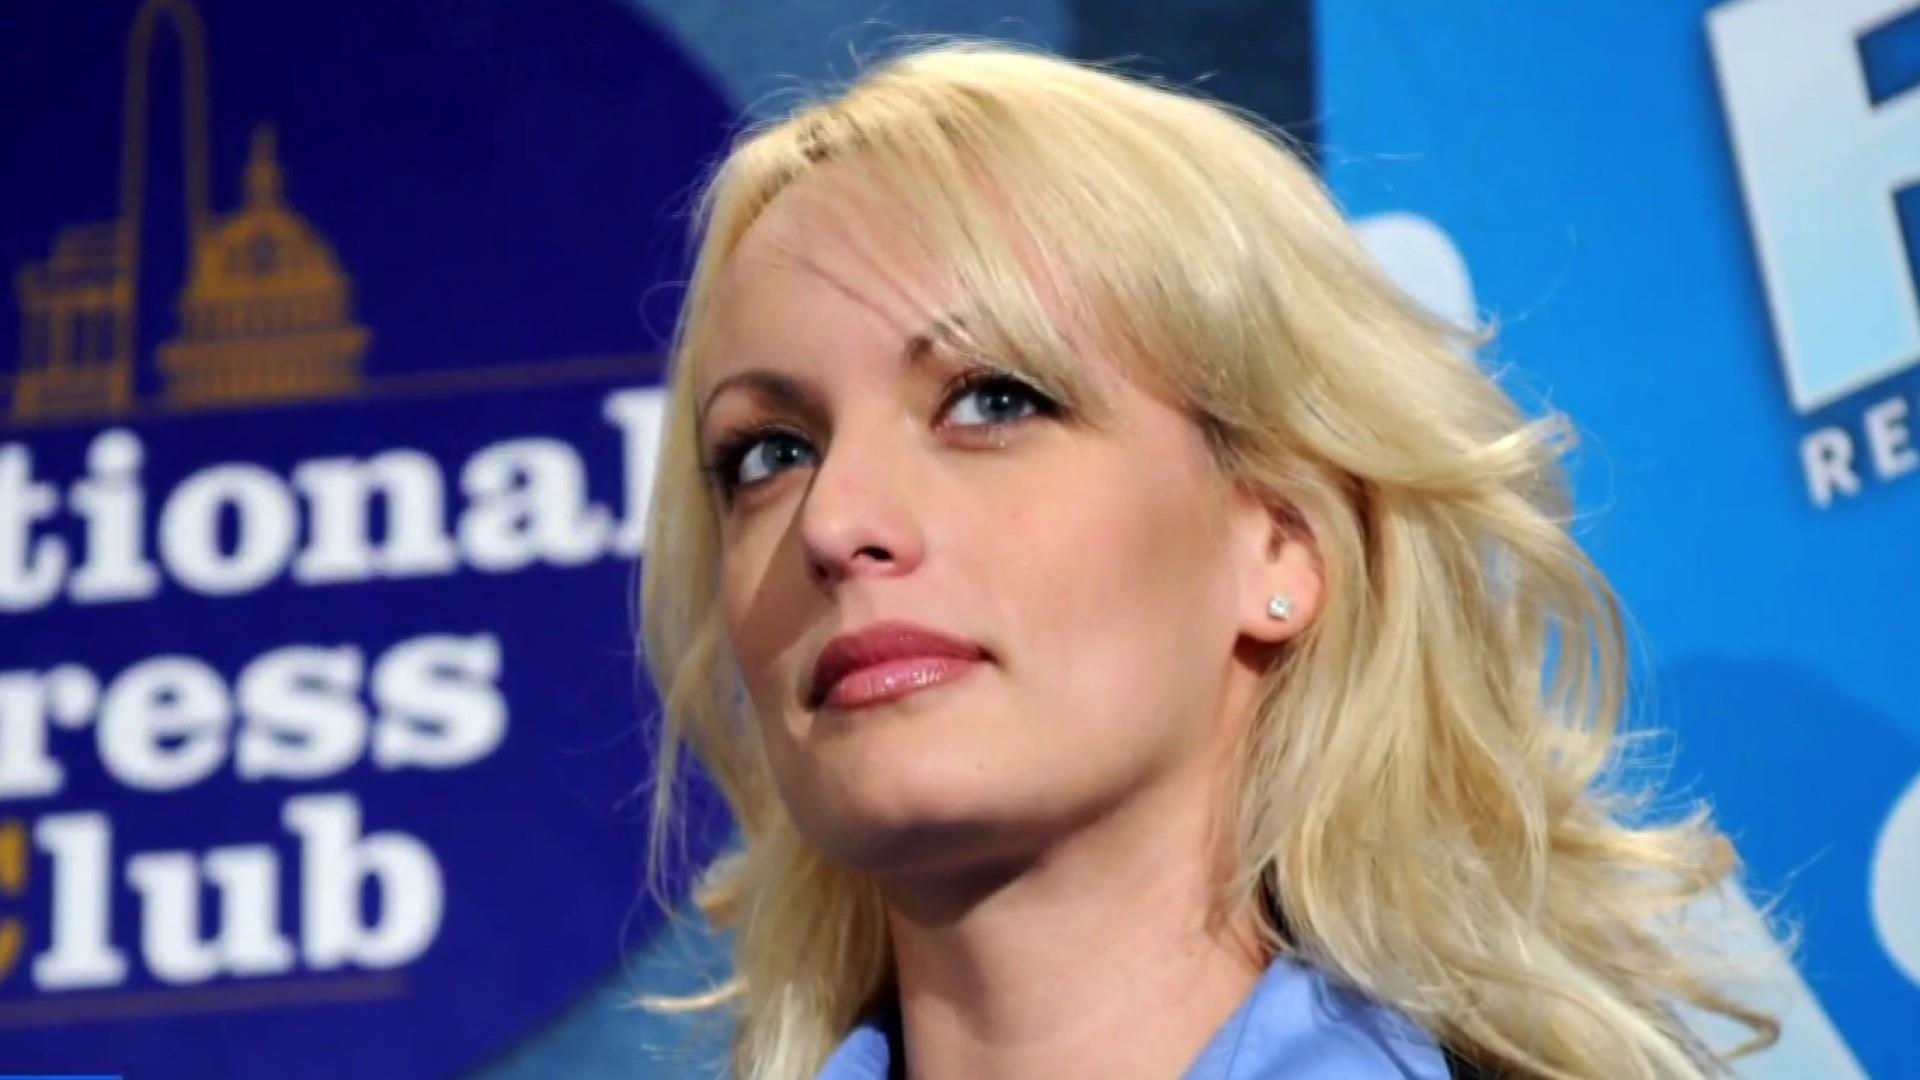 Mother Truckers In Porn Stars - Porn Star Stormy Daniels Won't Speak to Ailing Mother - Mike South